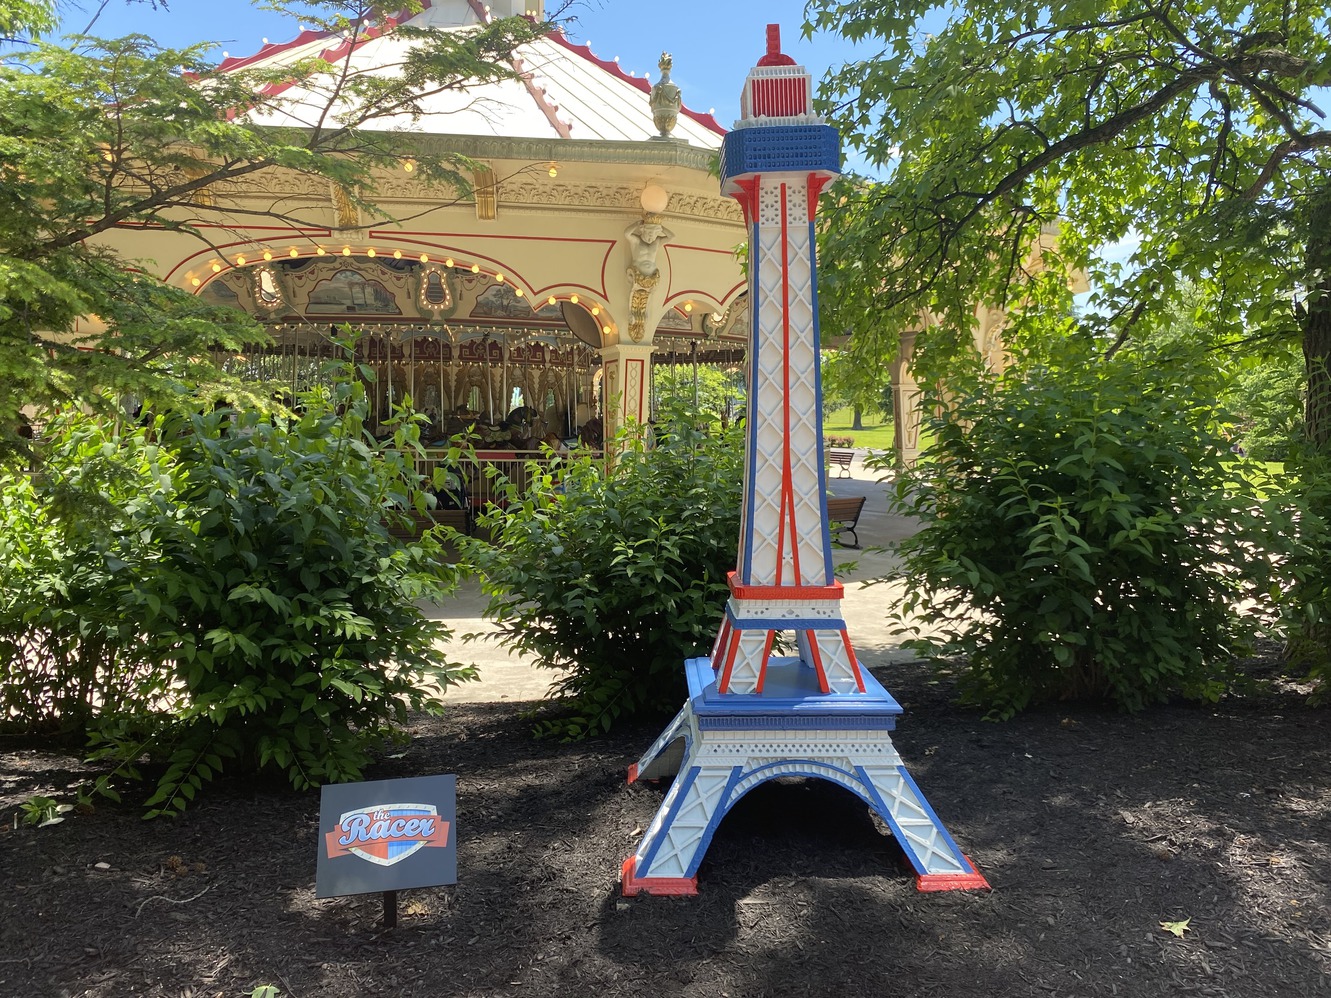 This mini Eiffel Tower commemorates the Race roller coaster.